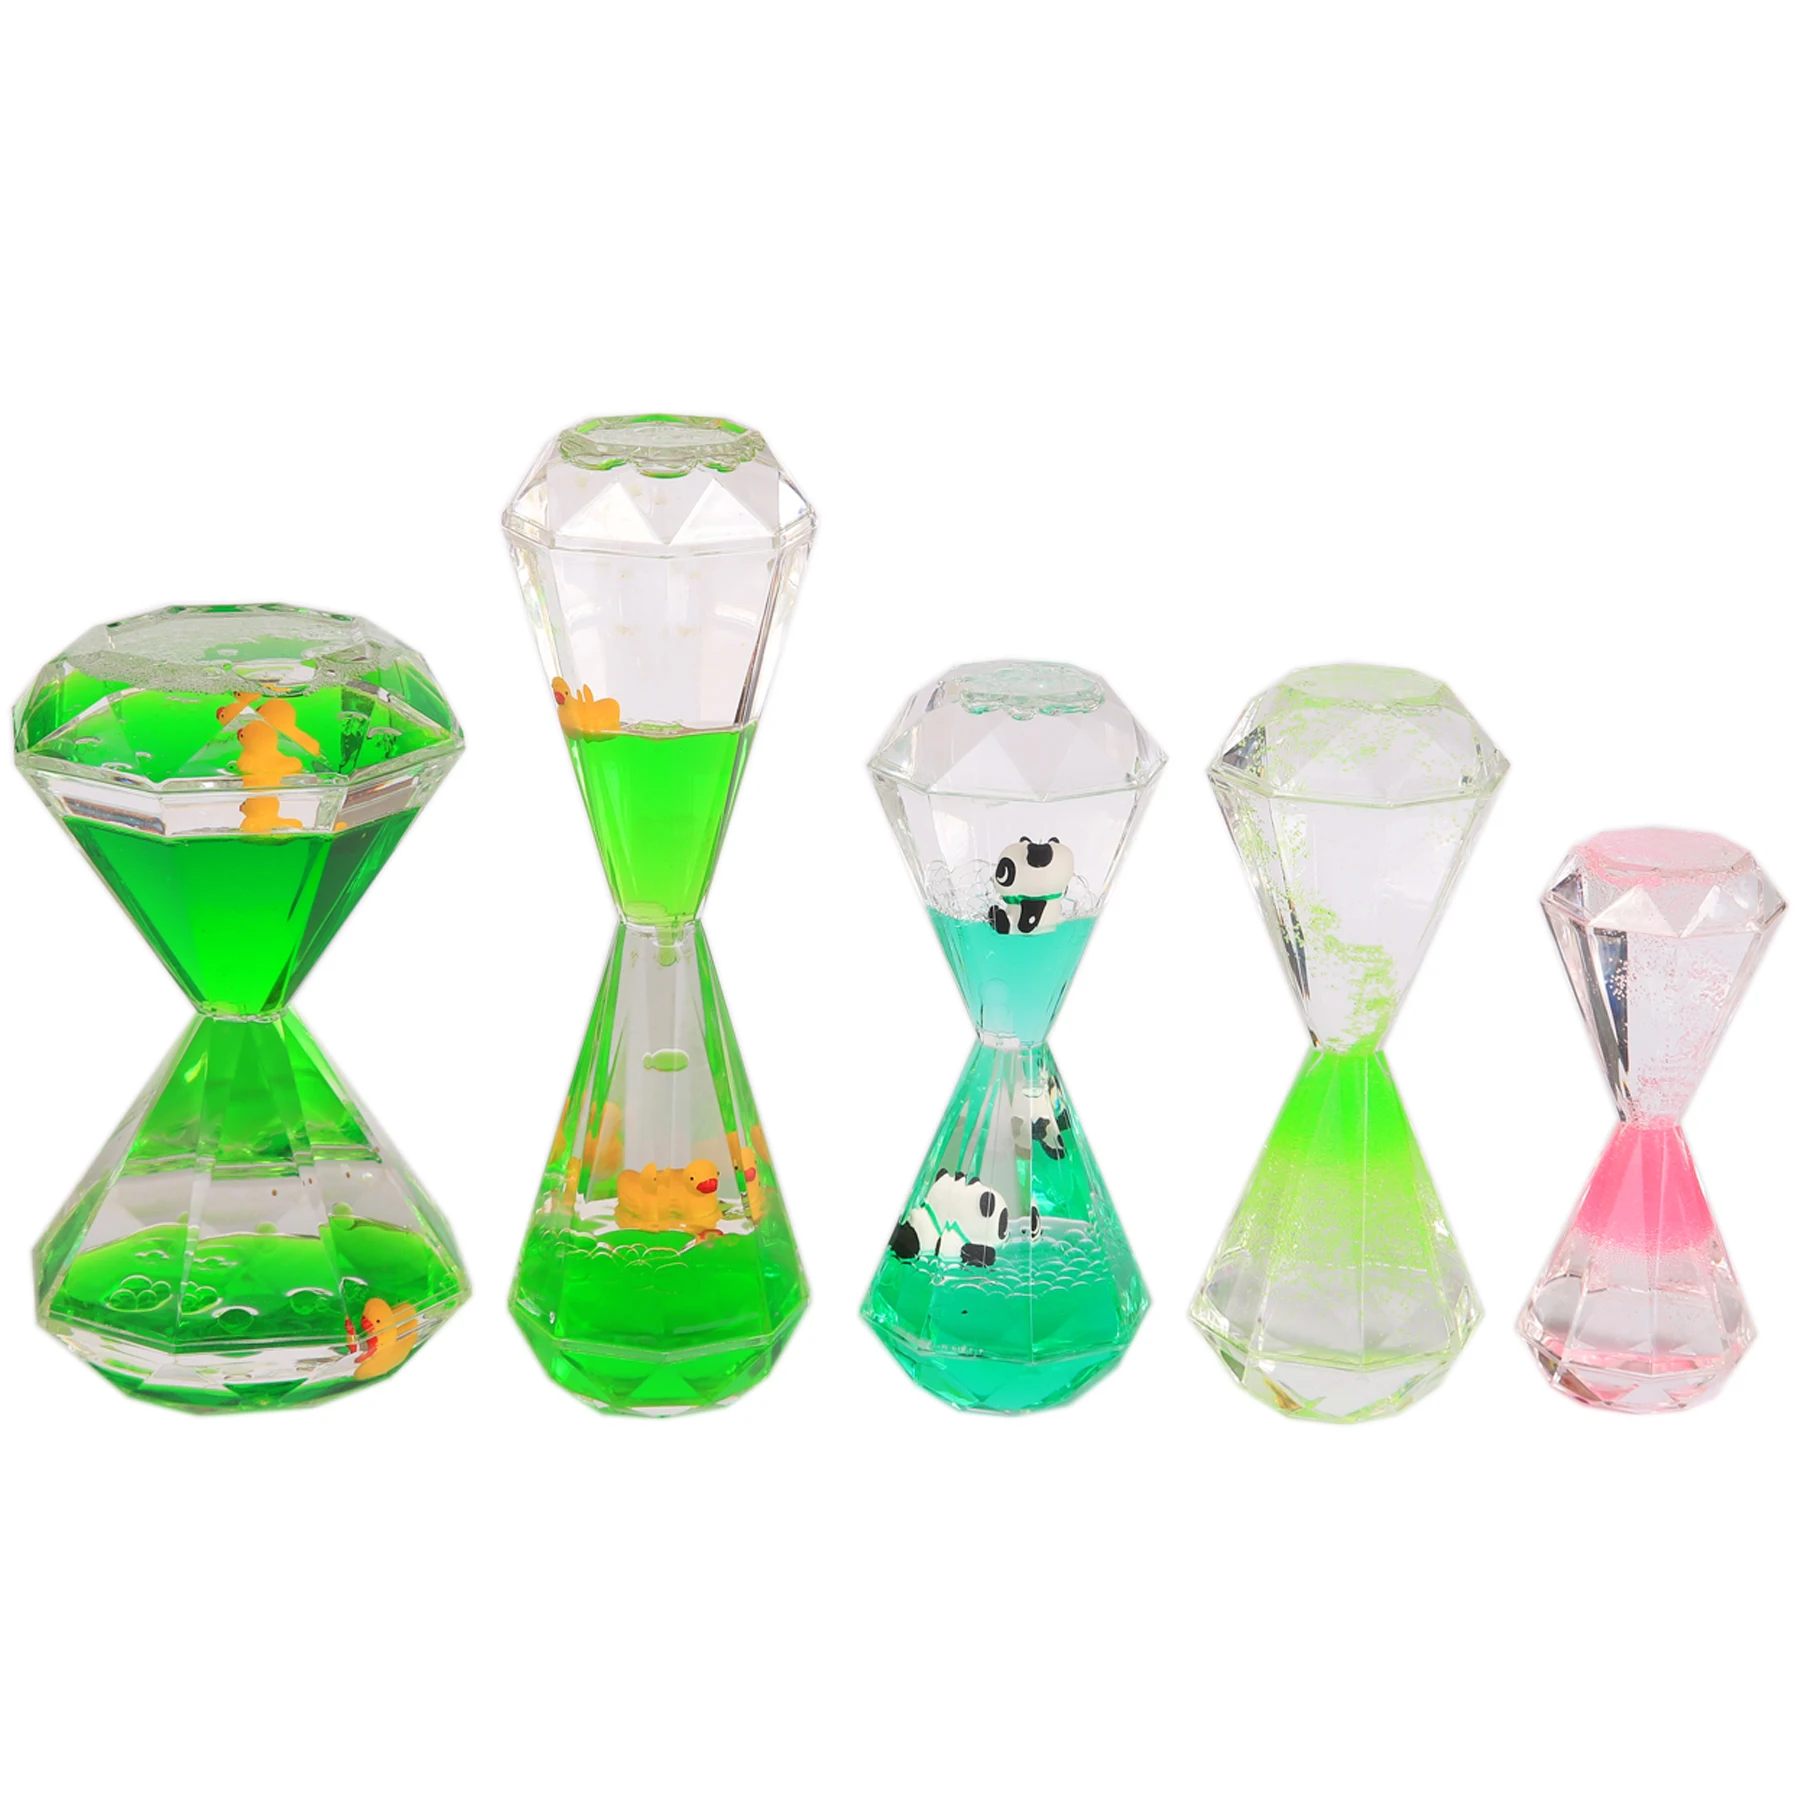 

Plastic Decorative Kids Toy Drip Oil Hourglass Moving Liquid Sand Timer, Green, blue, orange or customize color